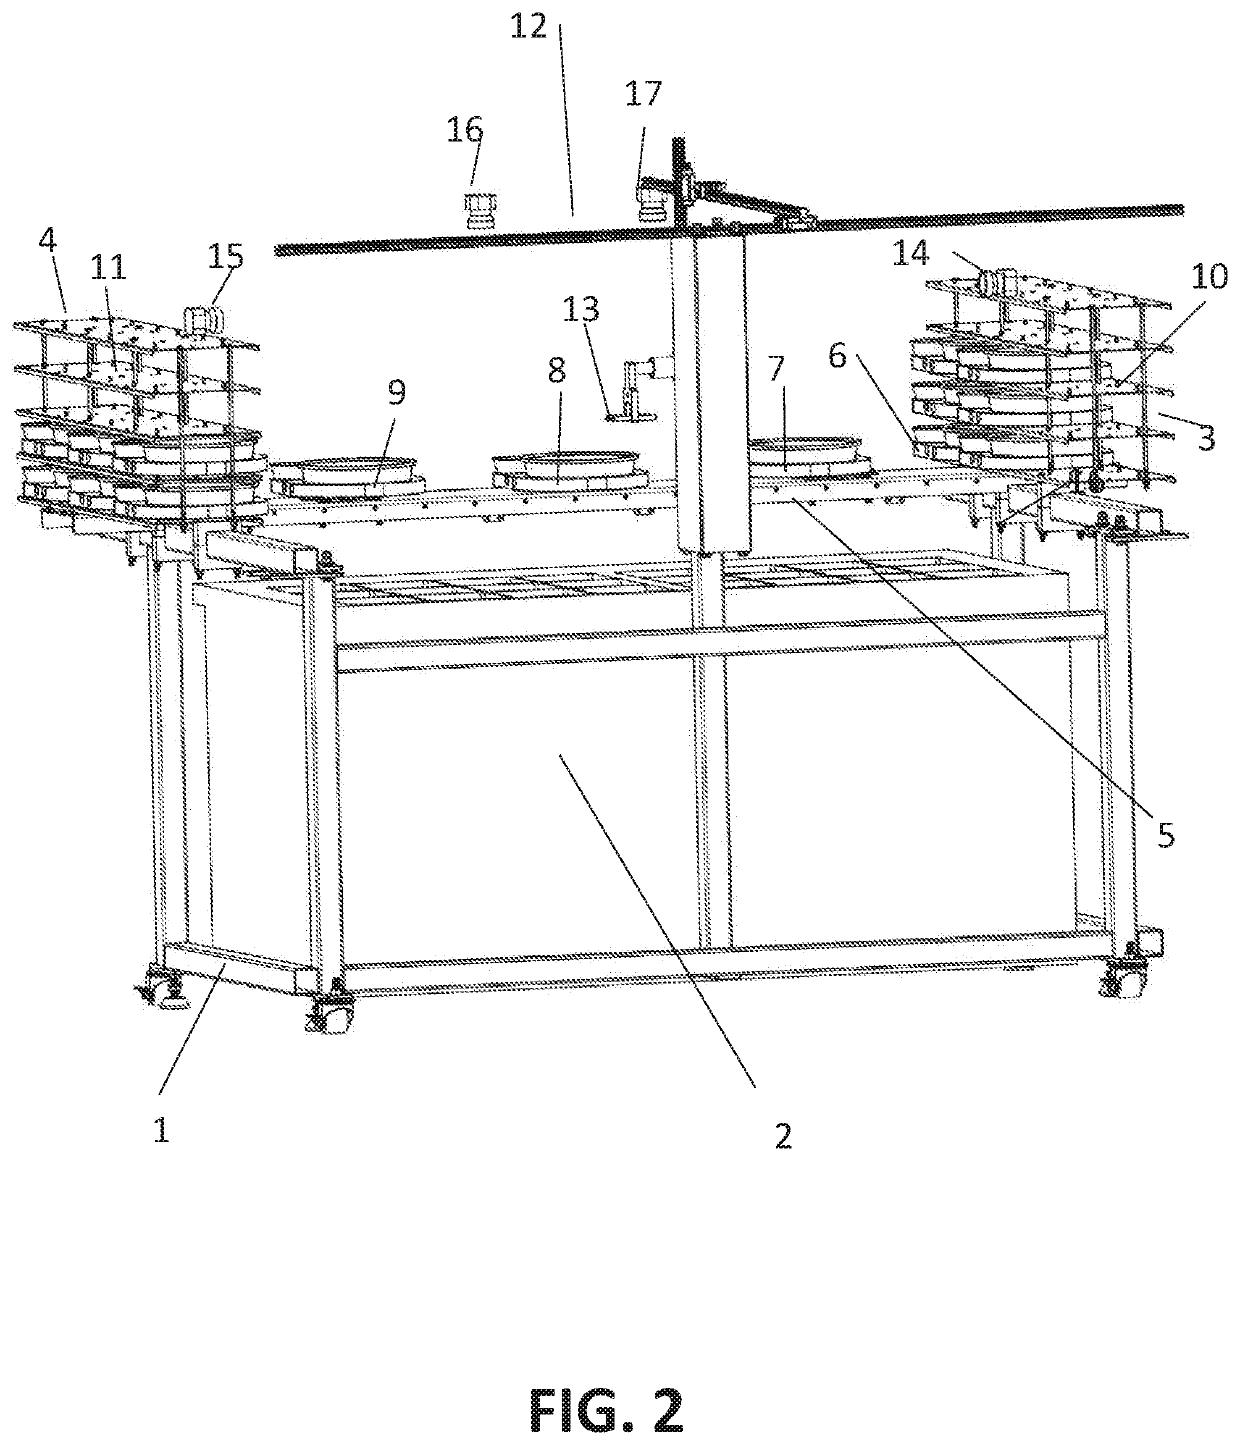 Buffered order management system with computer vision checks for automated restaurant order assembly